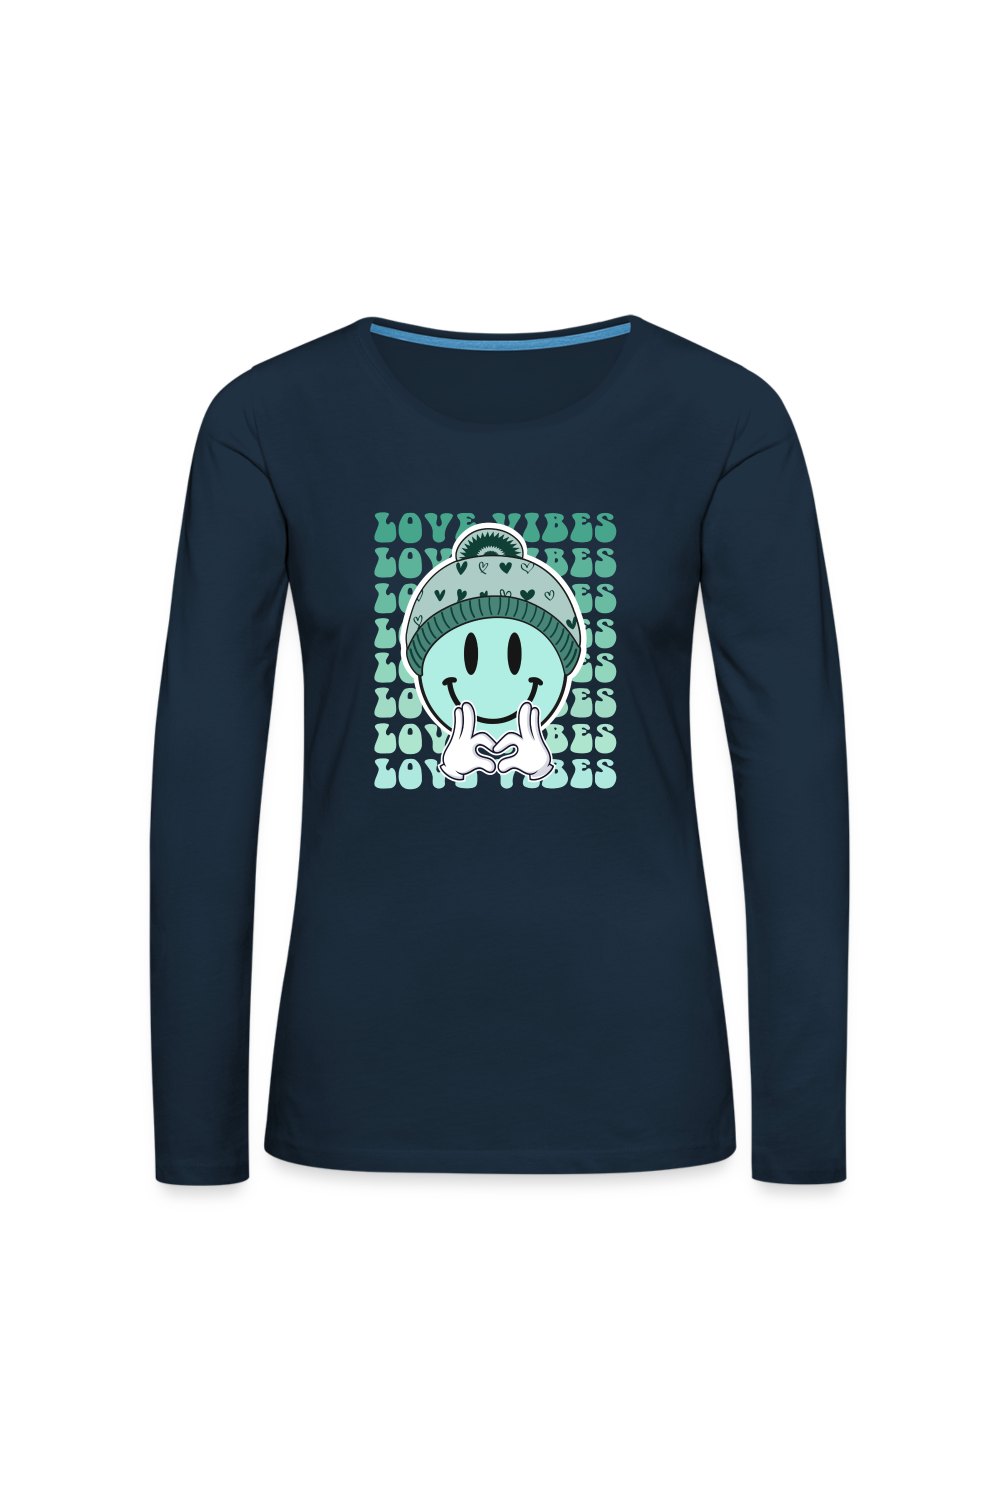 Women's Blue Smiley Face Love Vibes Valentine's Day Long Sleeve T-Shirt - deep navy - NicholesGifts.online